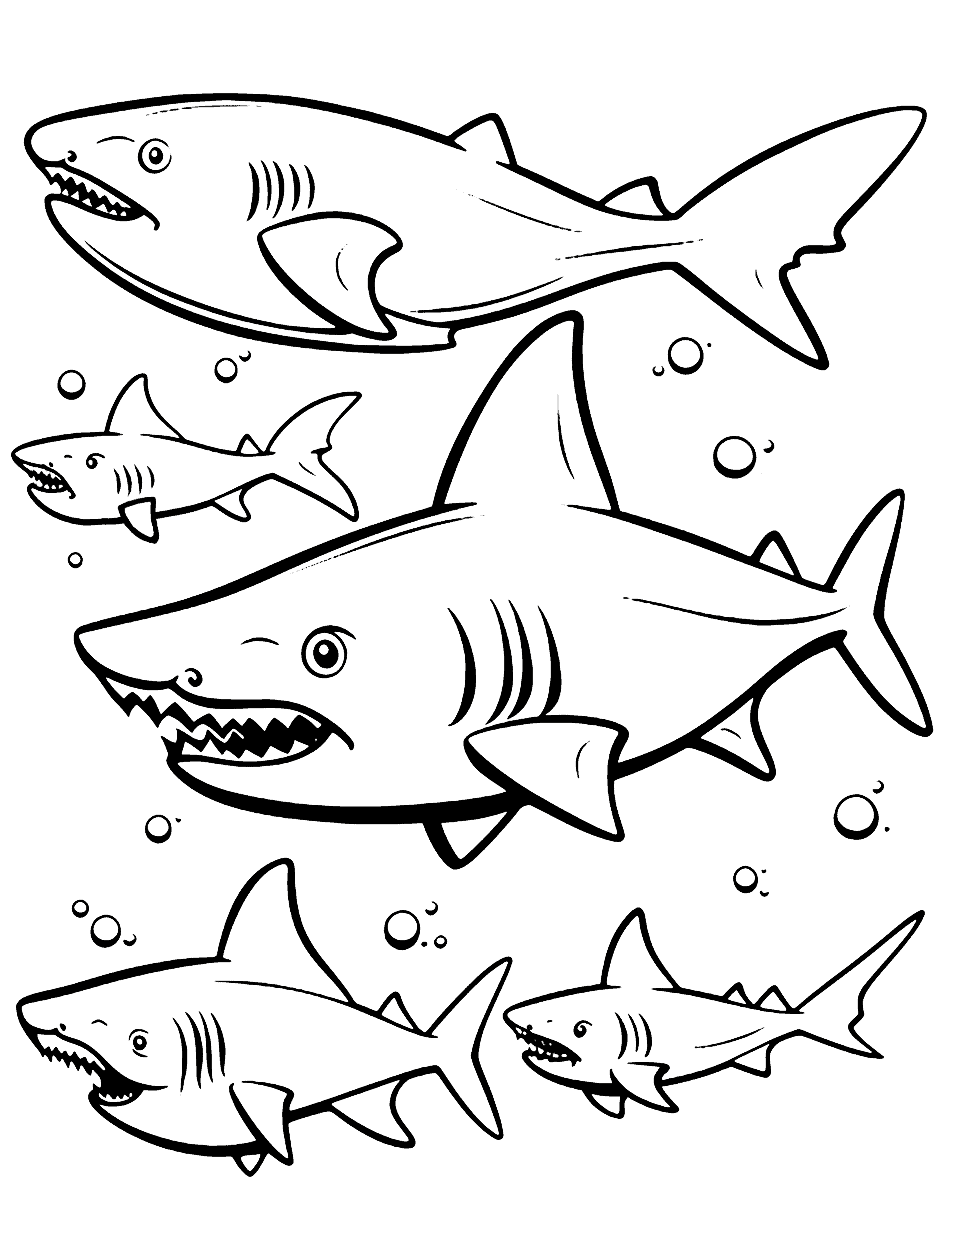 Multiple Shark Species Coloring Page - An array of multiple shark species for kids to color.